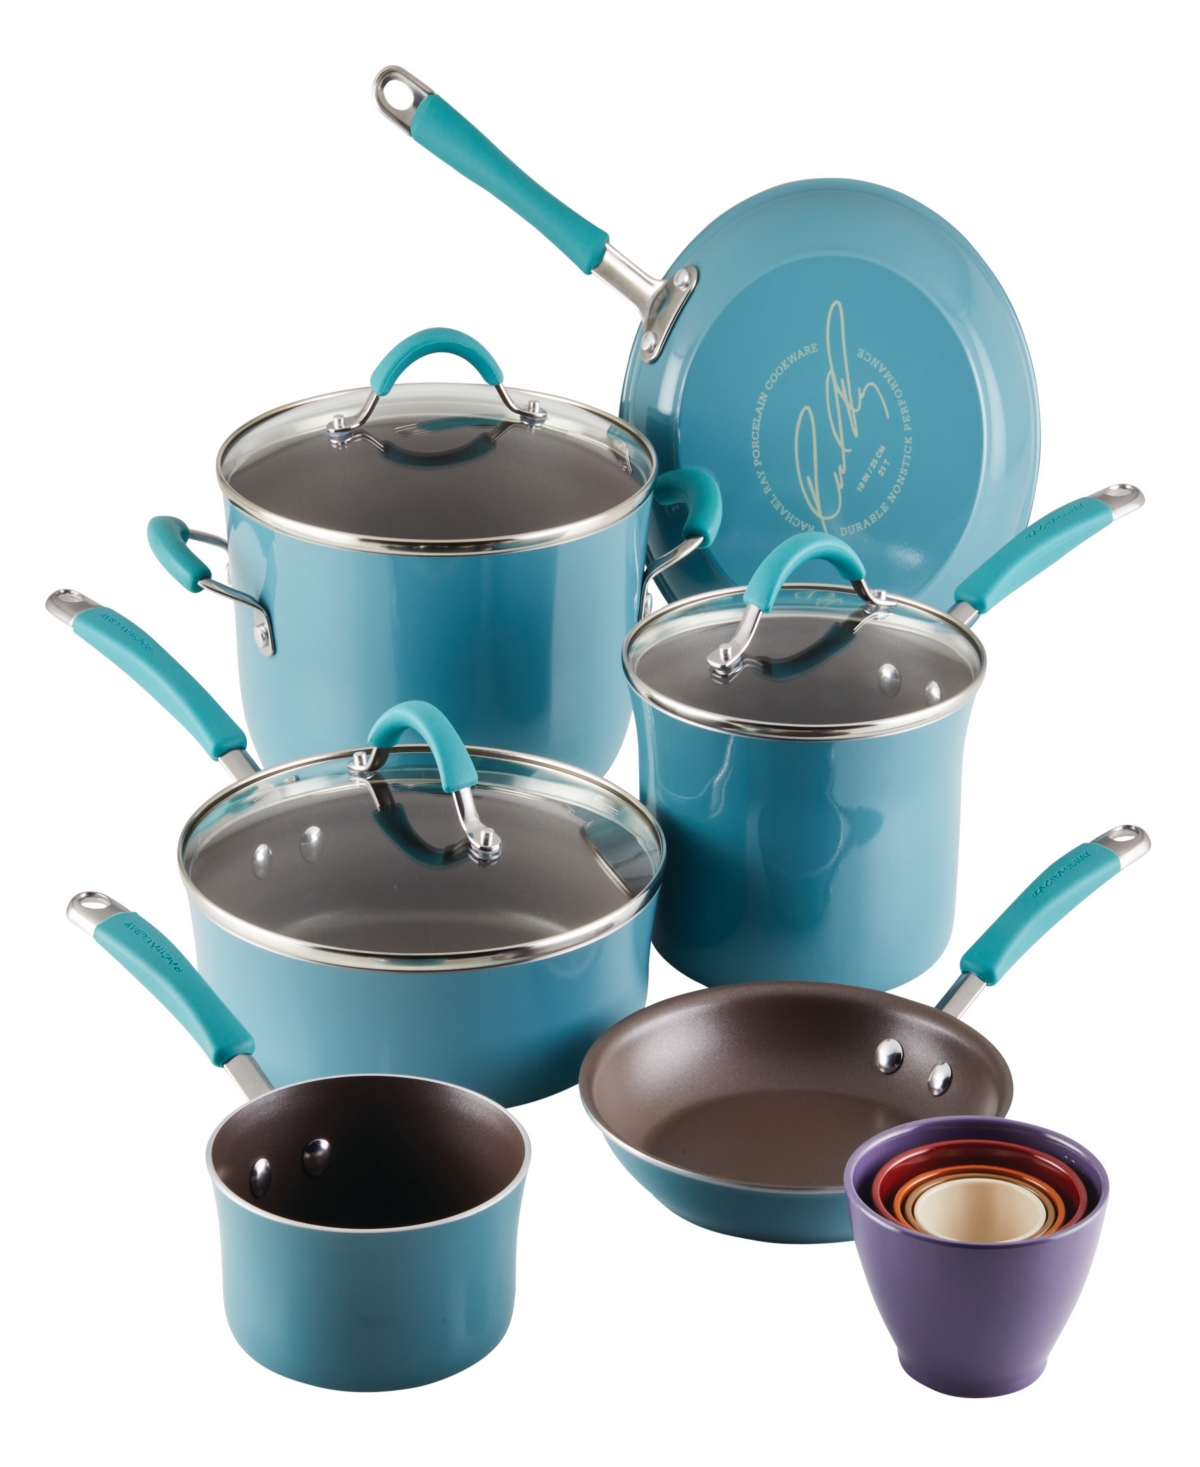 Rachael Ray Cucina Porcelain Enamel 14 Piece Nonstick Cookware And Measuring Cup Set In Agave Blue